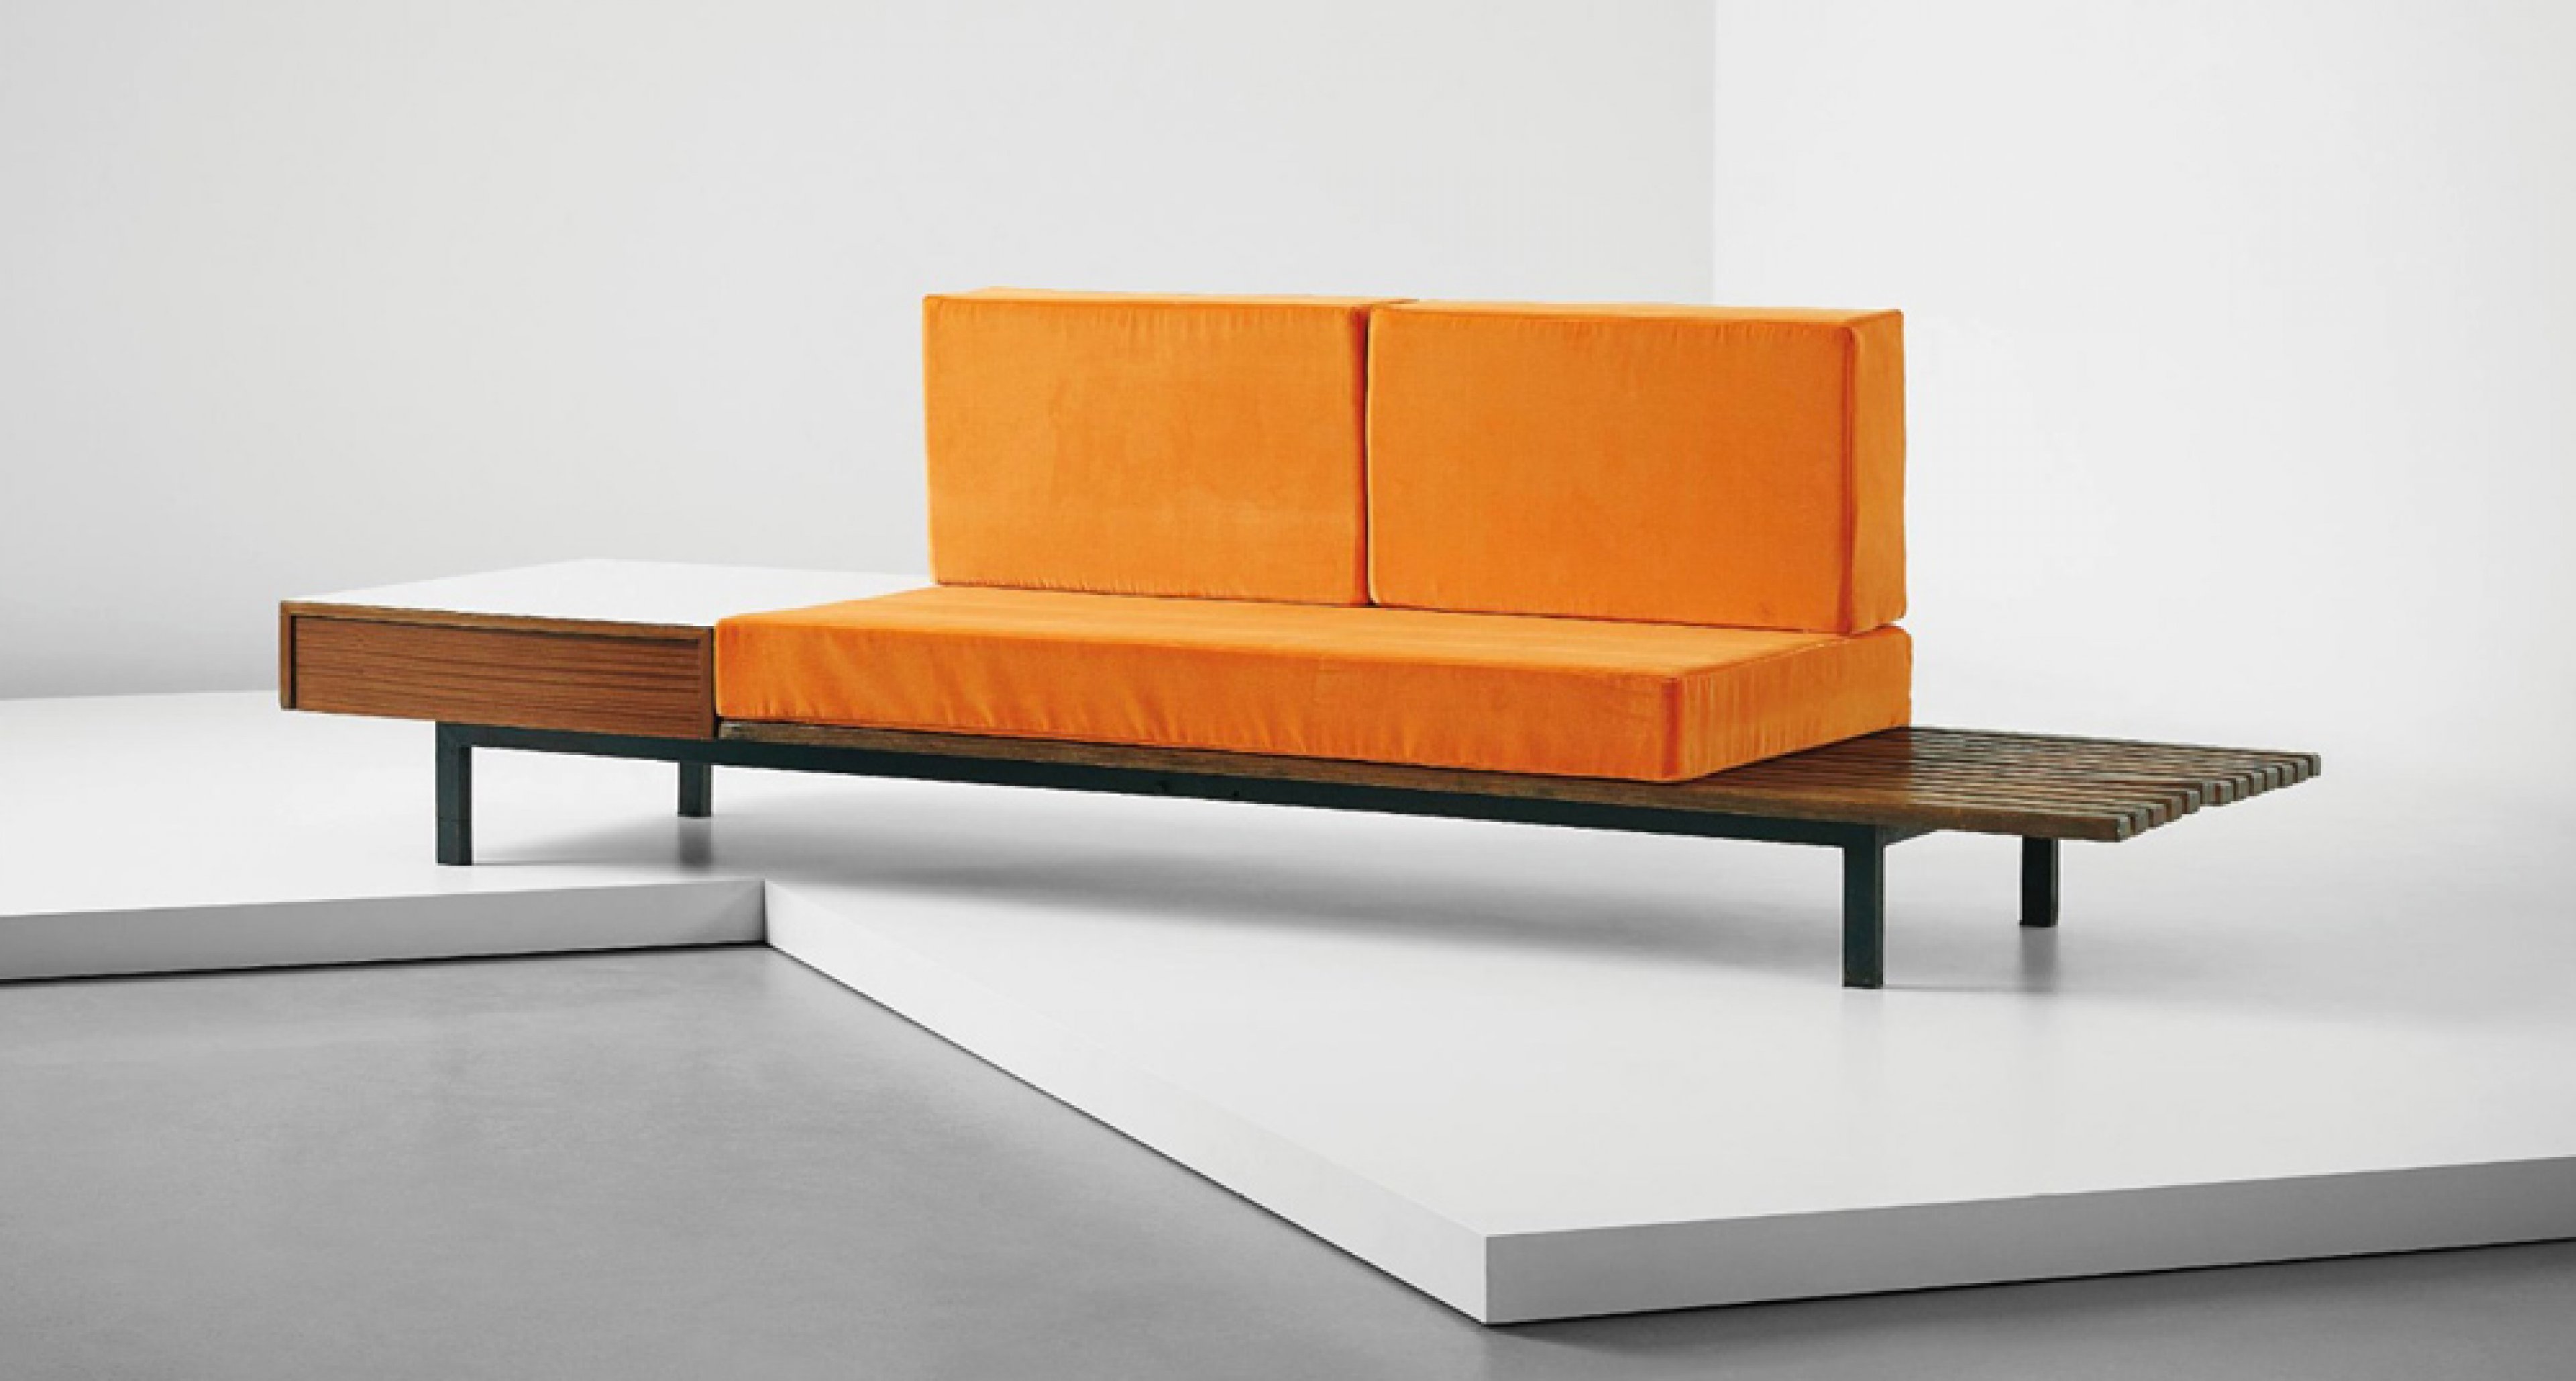 Phillips To Auction Famous Furniture Designers Work In New York